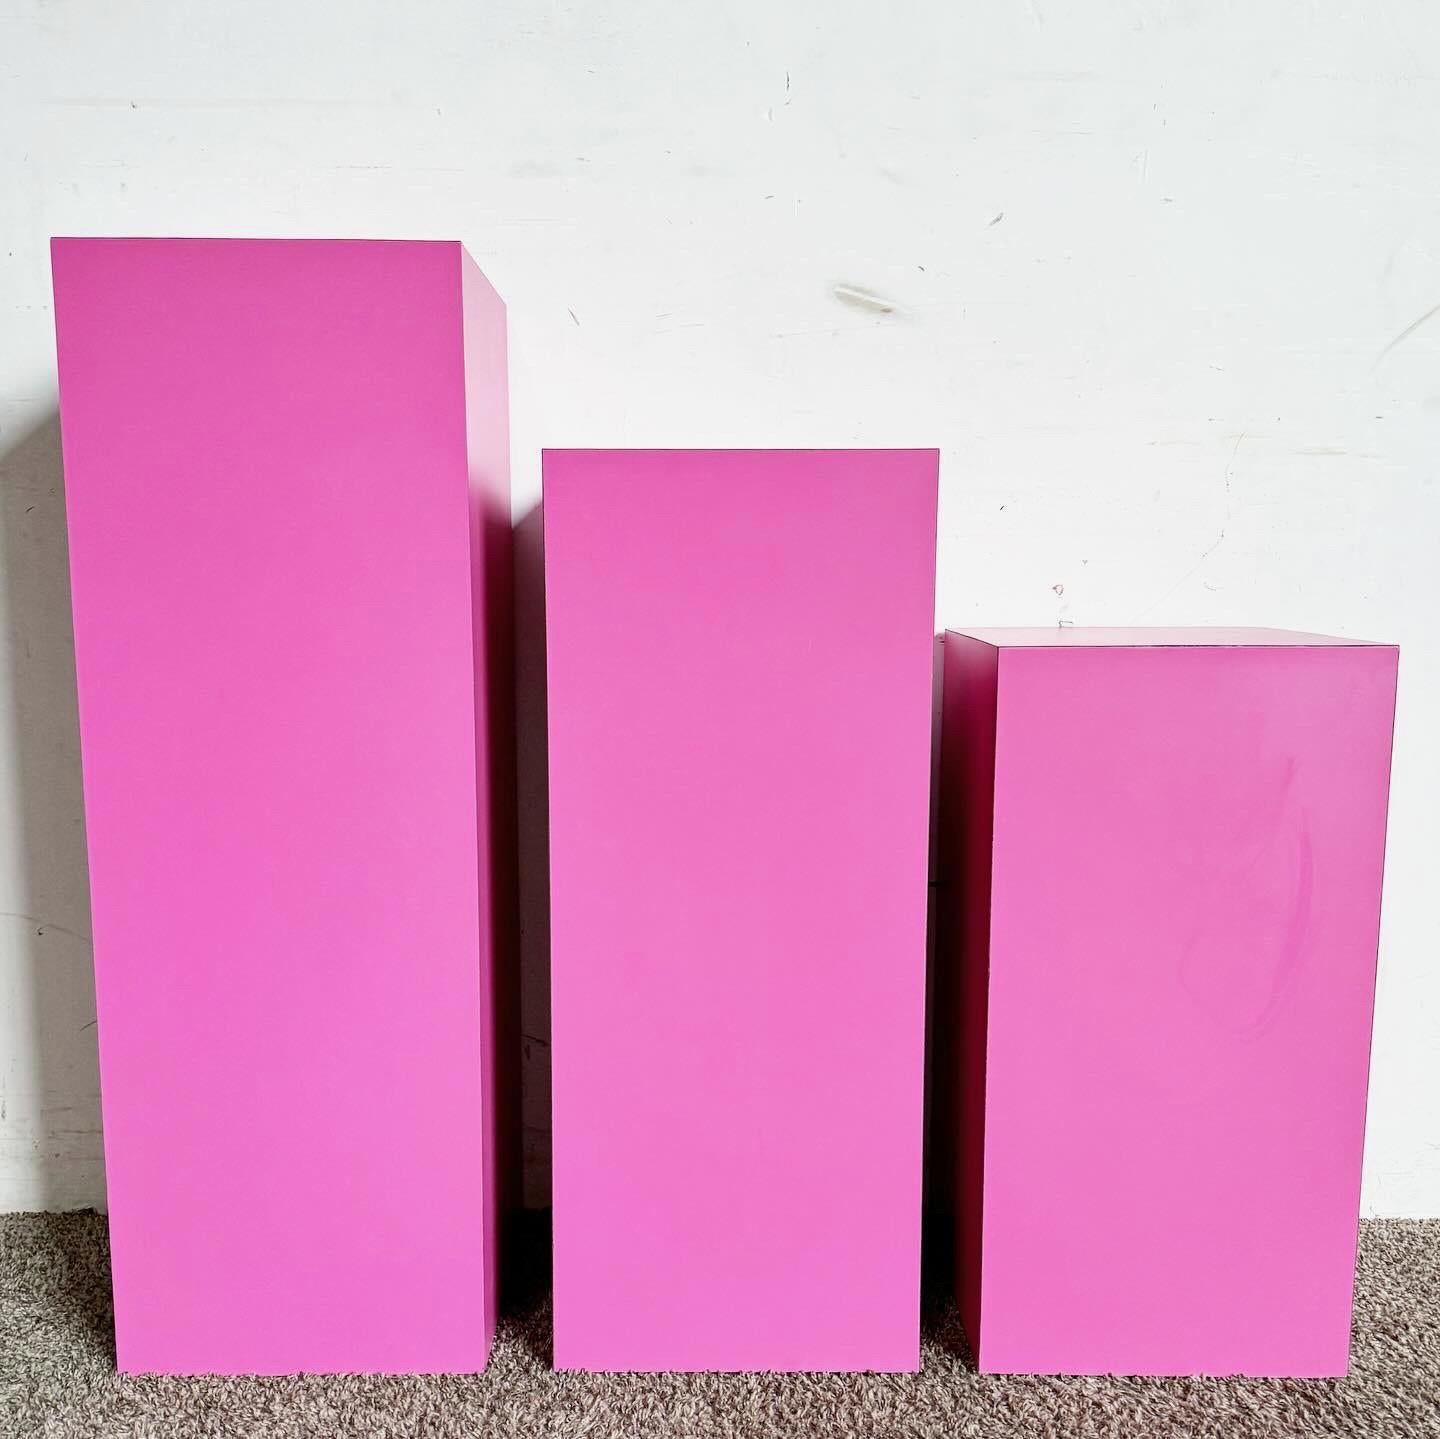 Invigorate your decor with the Postmodern Pink Matte Laminate Ascending Rectangular Prism Pedestal Tables, a set of three. These tables boast a lively pink matte finish, perfect for adding a dynamic pop of color. With heights of 36.25‚Äù, 30.25‚Äù,